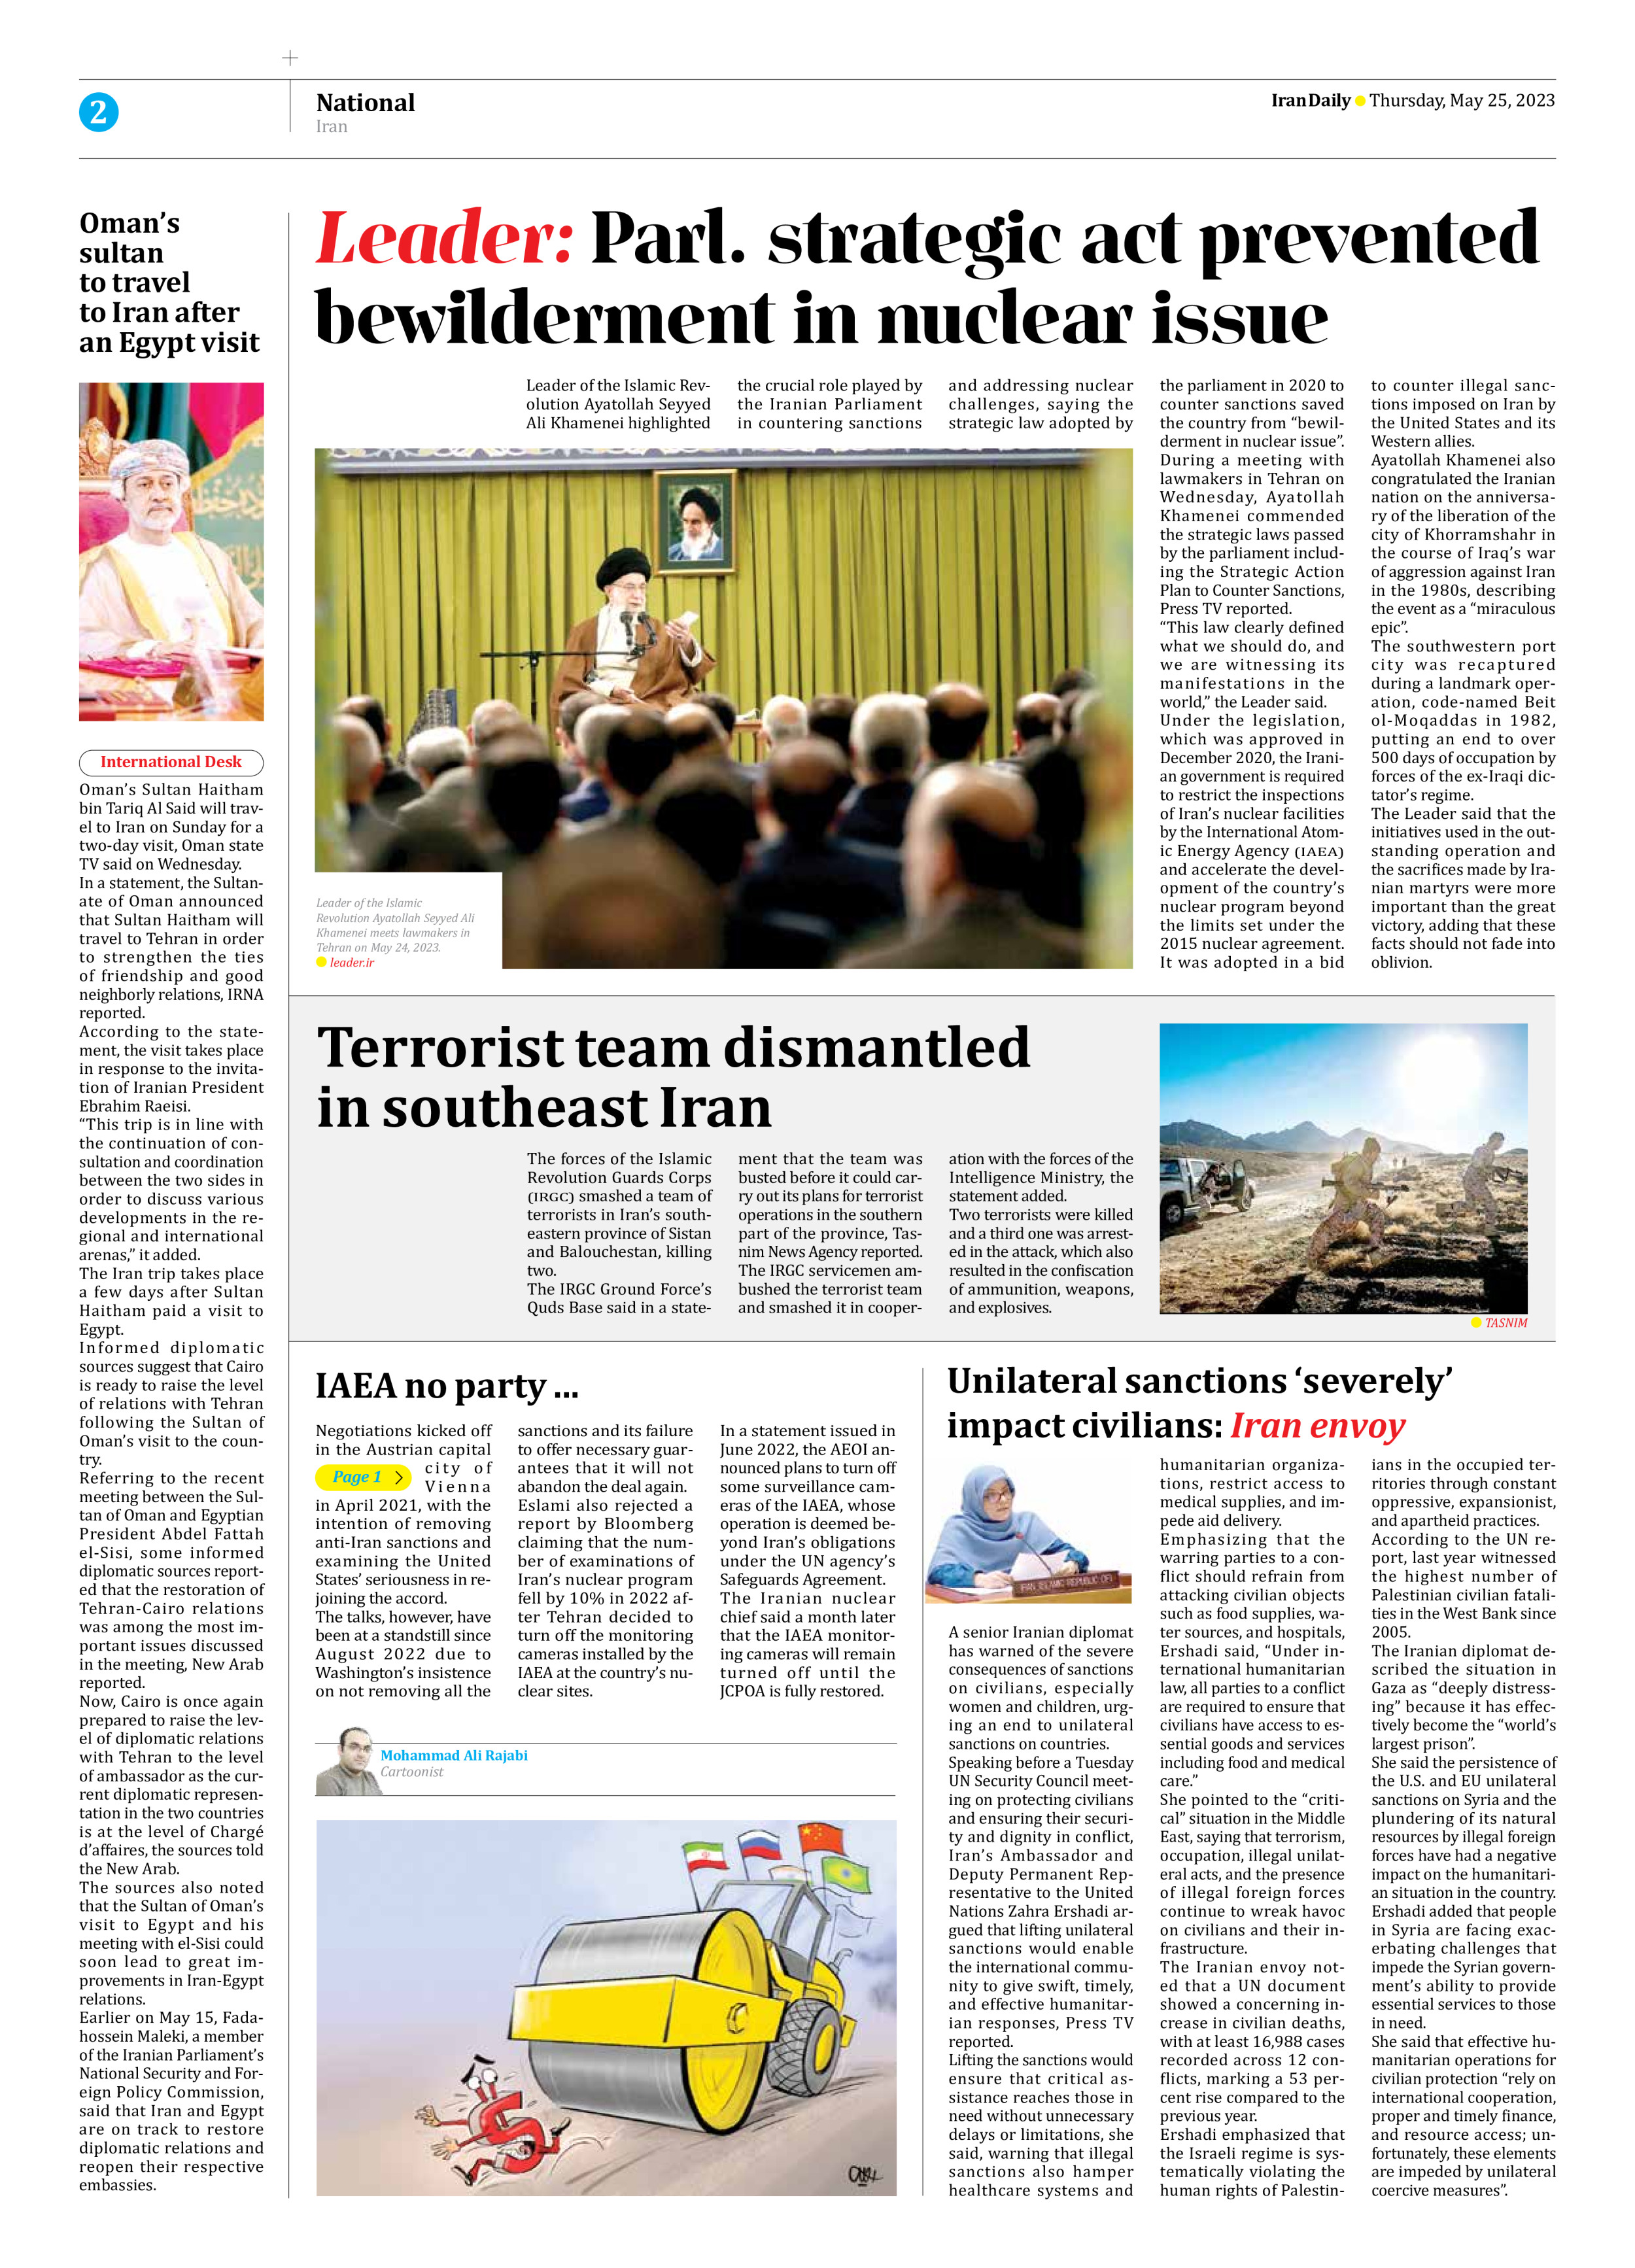 Iran Daily - Number Seven Thousand Three Hundred - 25 May 2023 - Page 2